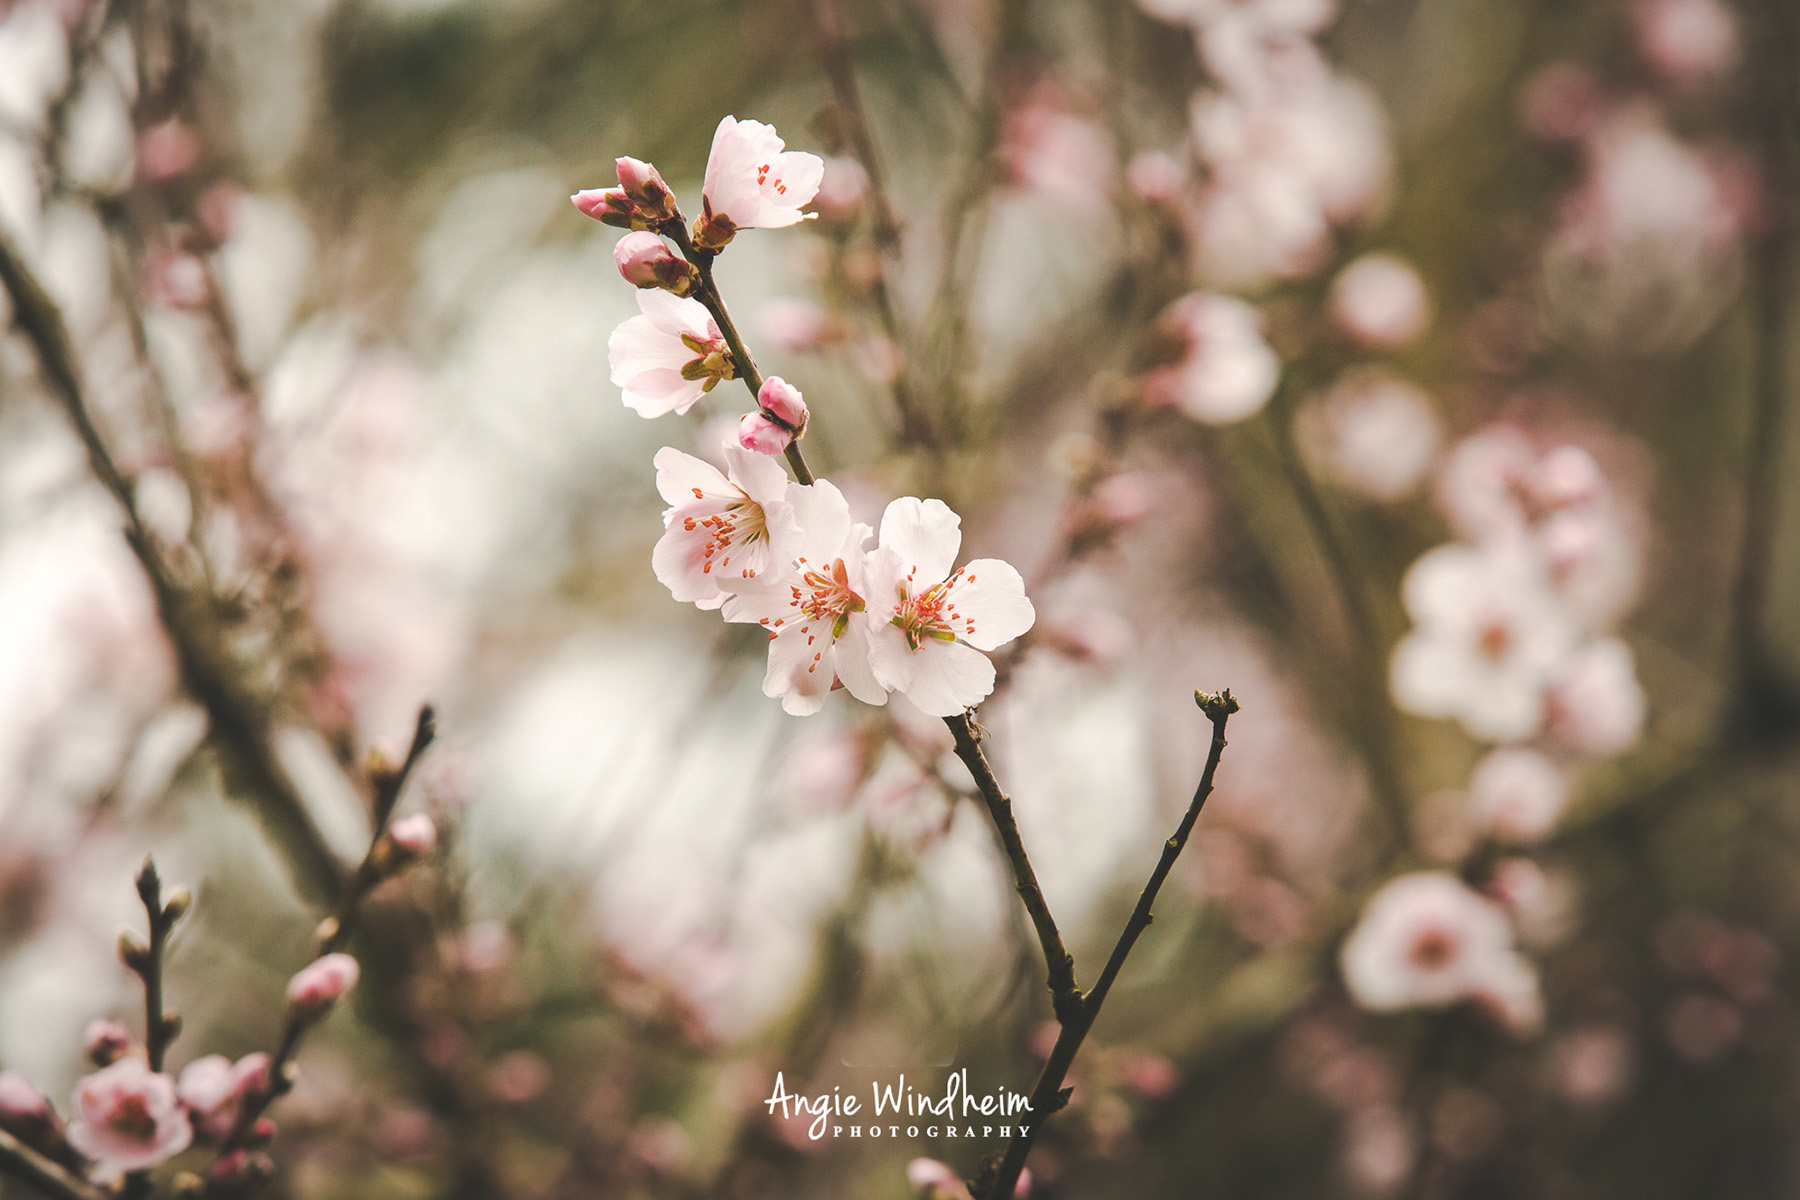 Photo of pink flowers covering an almond tree in spring.